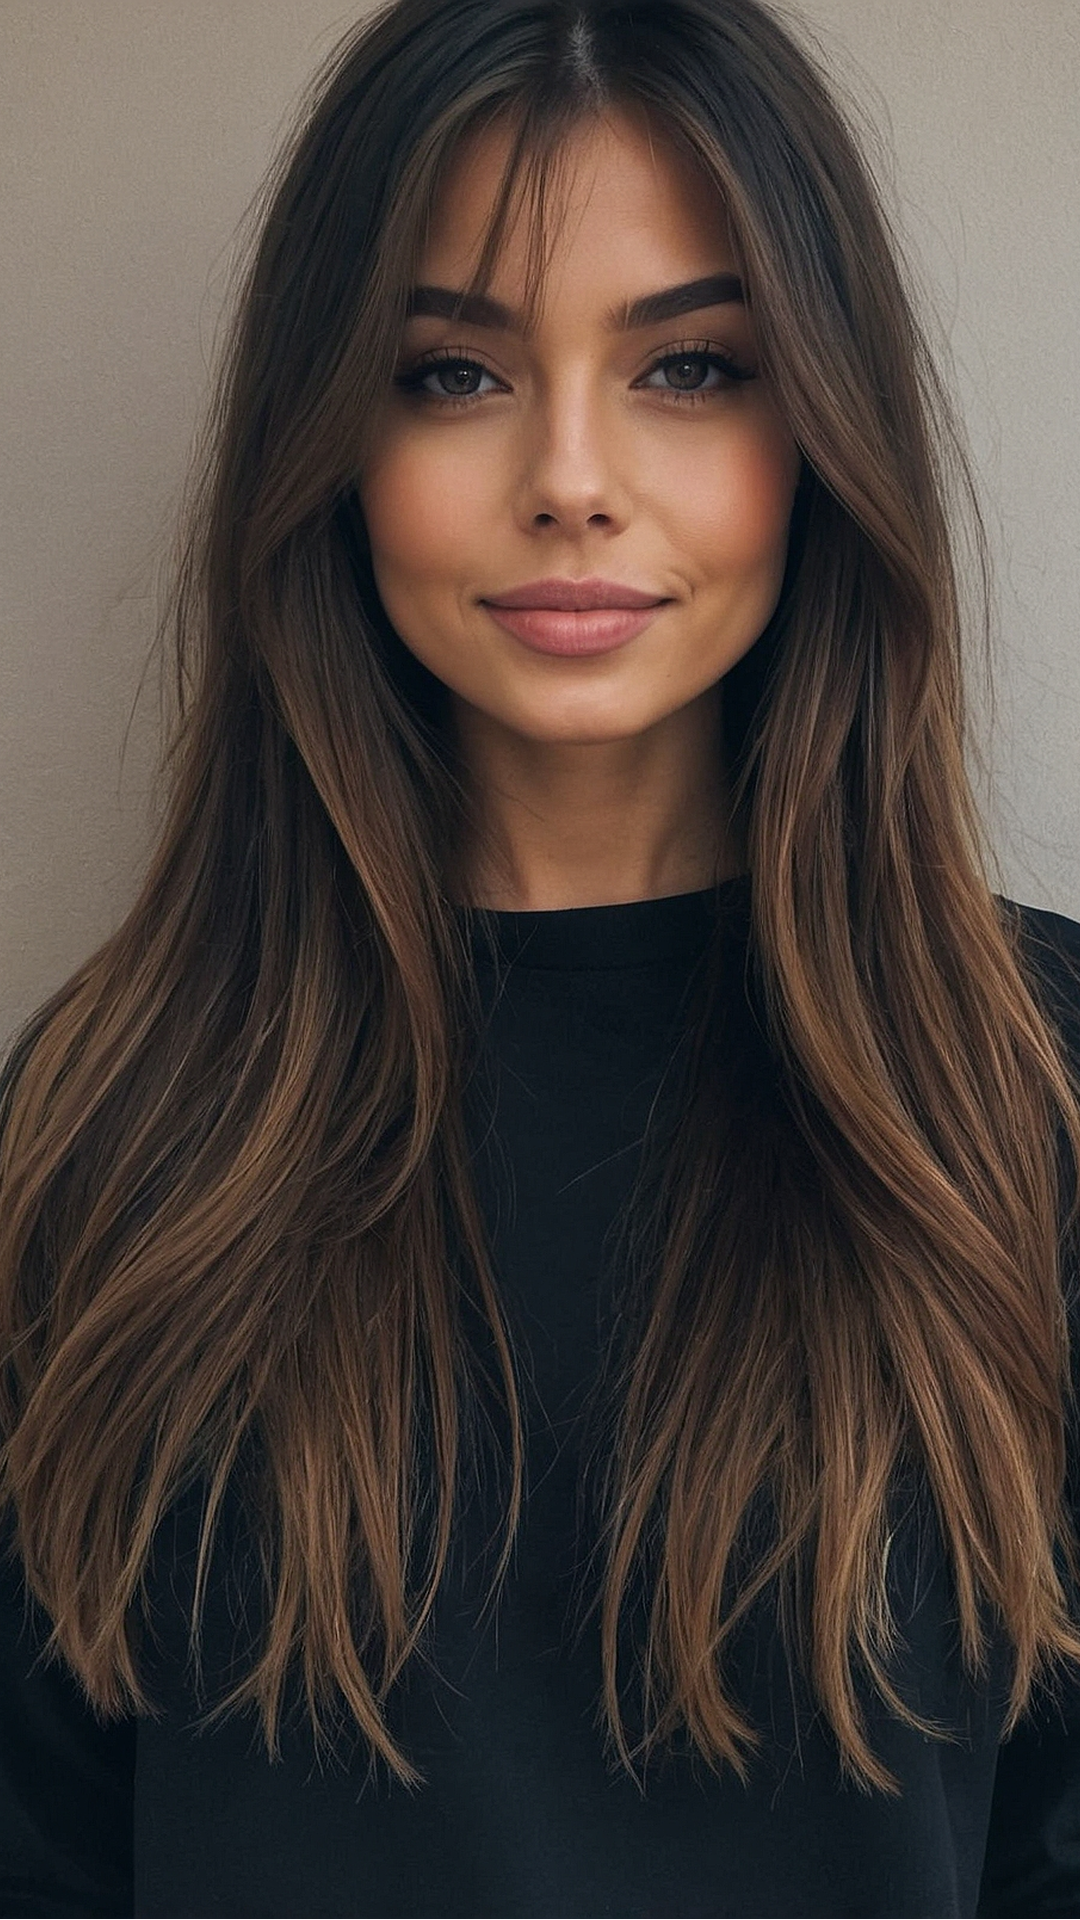 Straight and Stunning: Glamorous Hair Ideas for Women